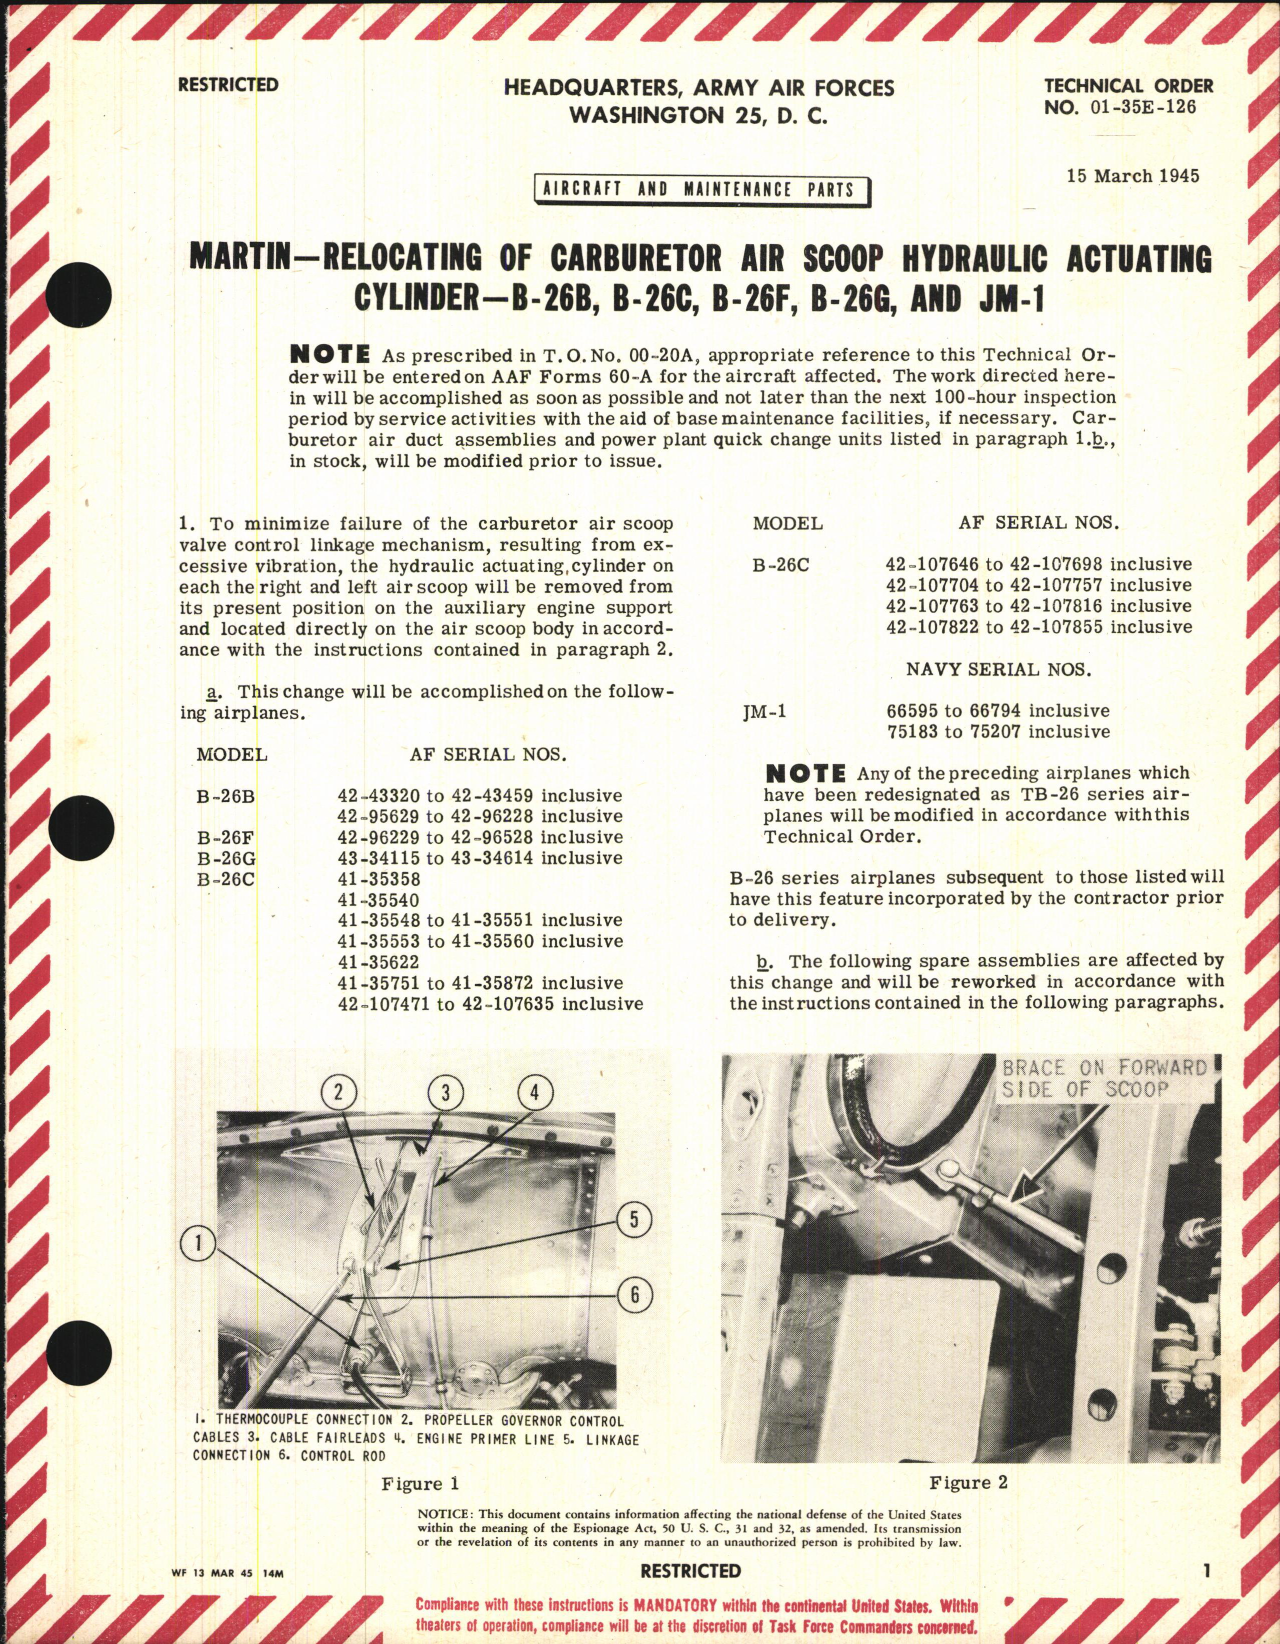 Sample page 1 from AirCorps Library document: Relocating of Carburetor Air Scoop Hydraulic Actuating Cylinder for B-26B, B-26C, B-26F, B-26G, and JM-1